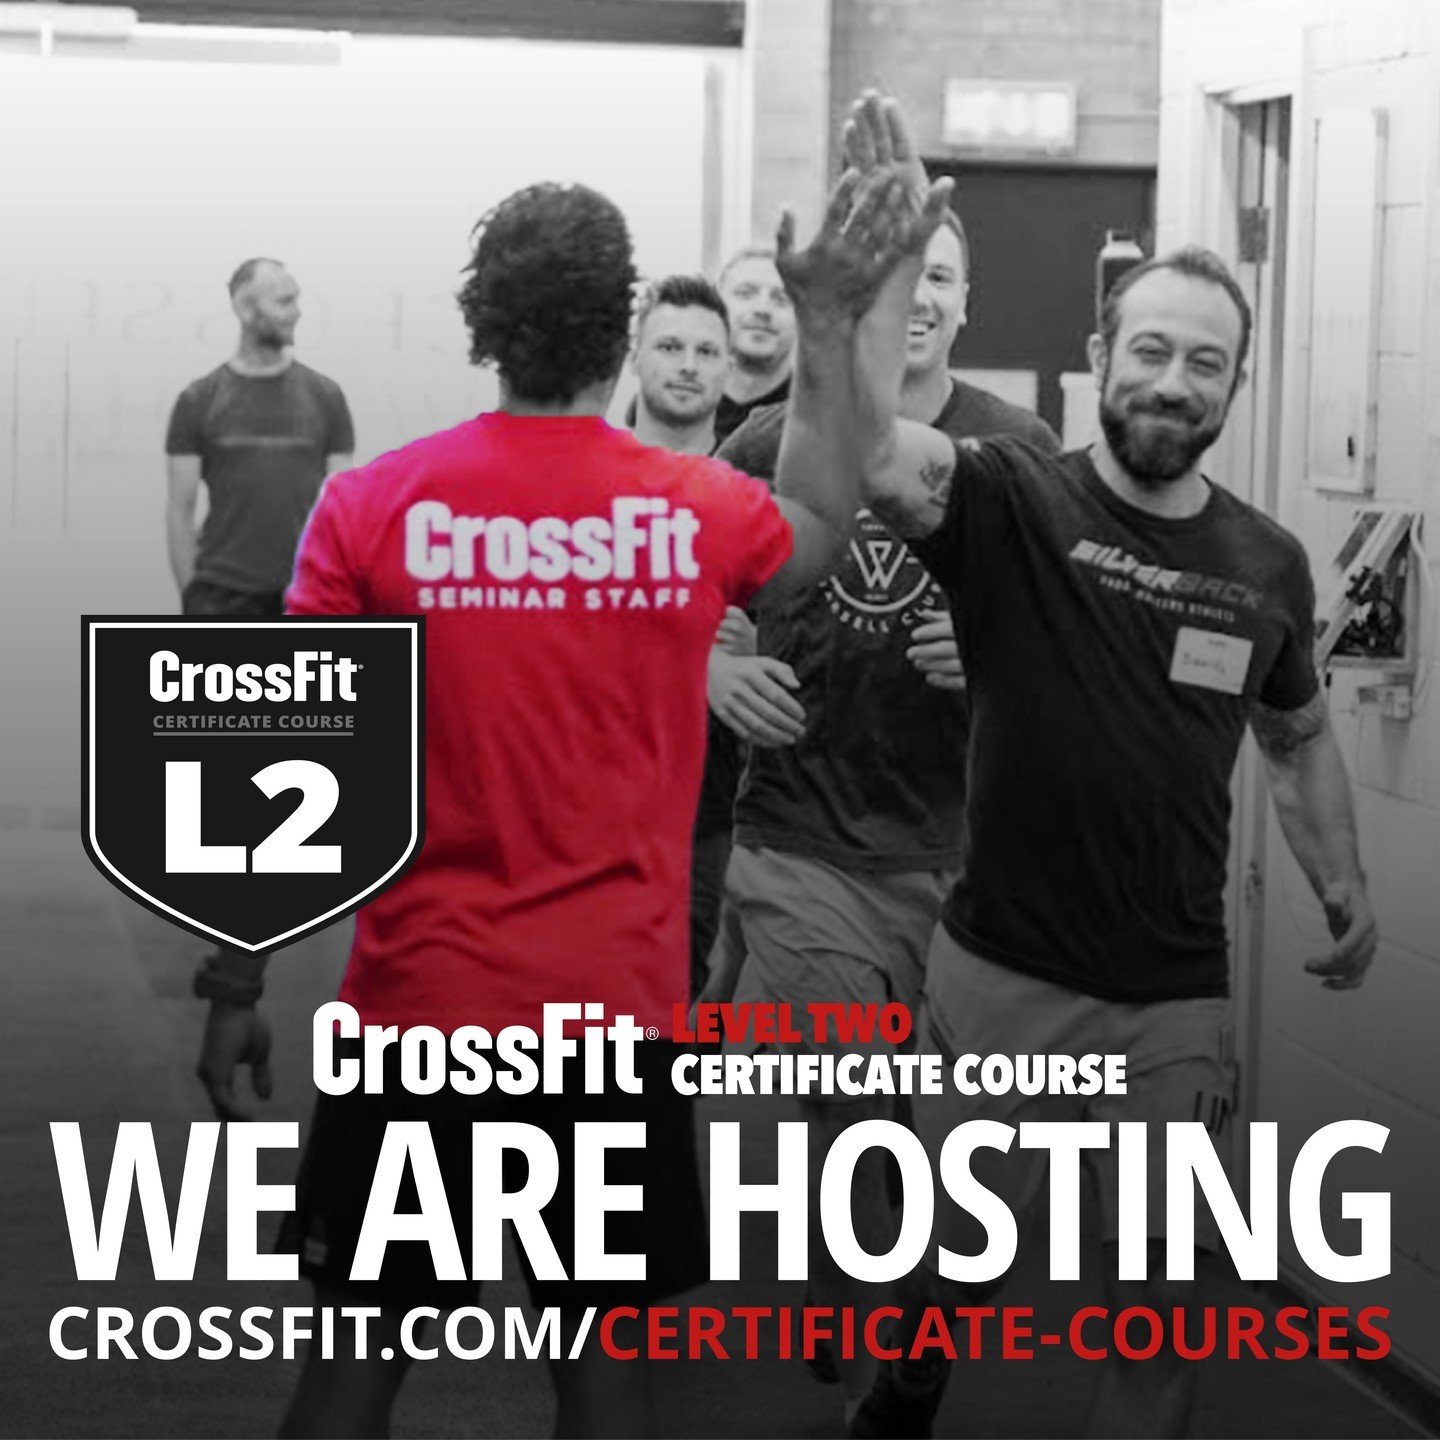 On May 25th, we will be hosting a CrossFit Level 2 course at our Redland location.

The Level 2 builds on the concepts and movements introduced at the Level 1. This course is ideally suited for any CrossFit trainer serious about delivering quality co